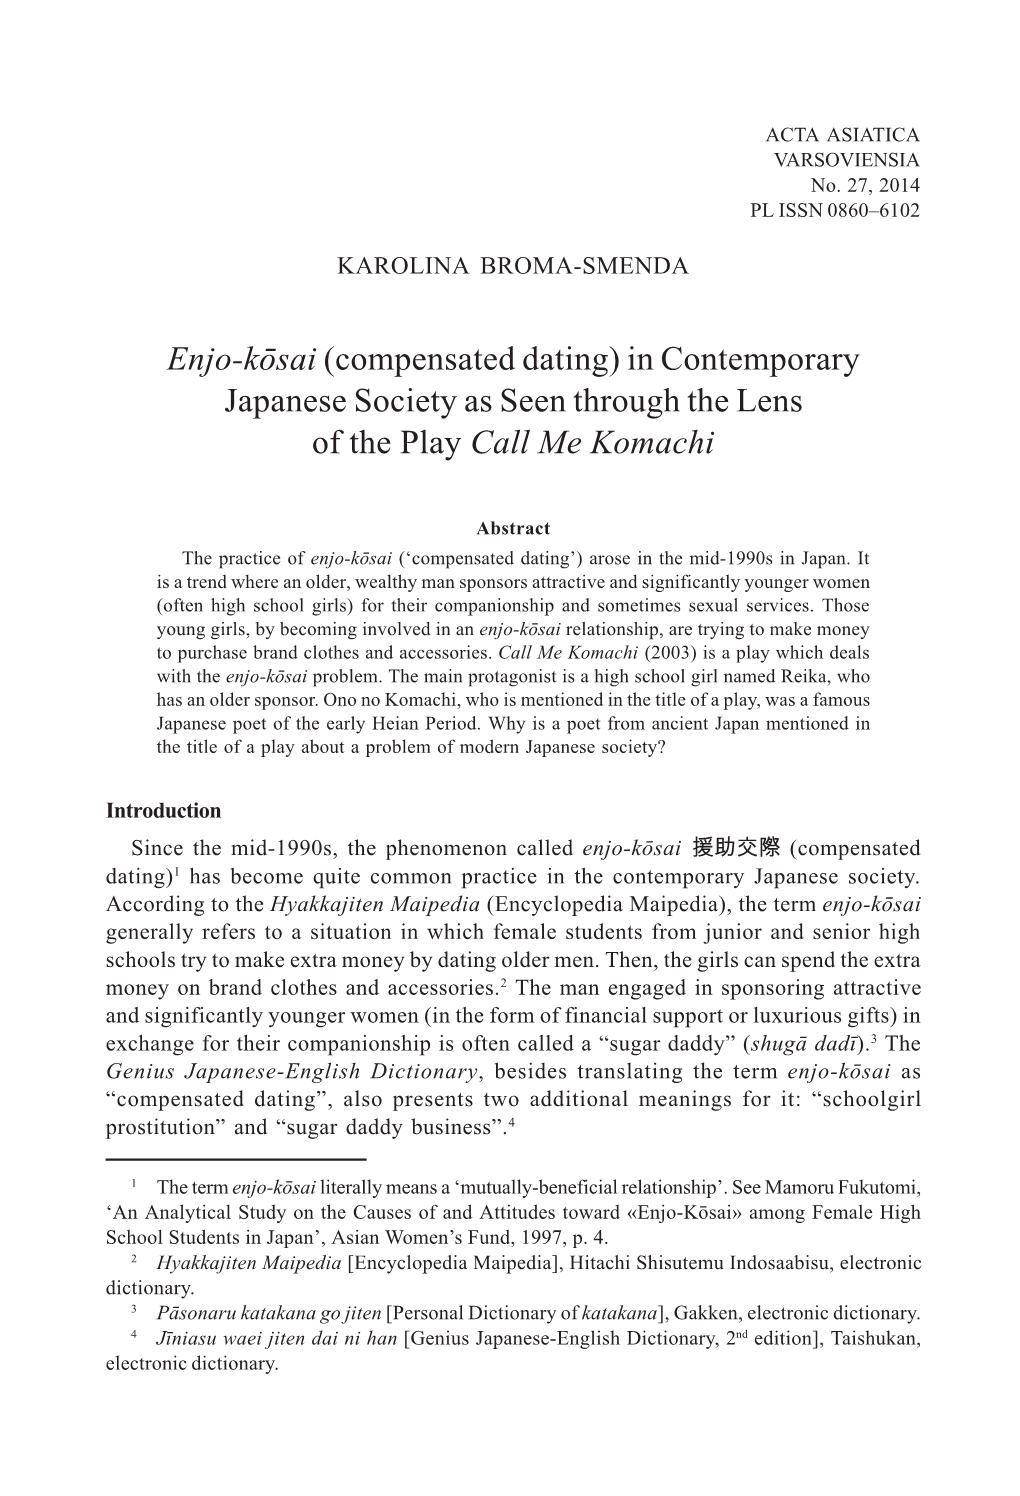 Enjo-Kôsai (Compensated Dating) in Contemporary Japanese Society As Seen Through the Lens of the Play Call Me Komachi